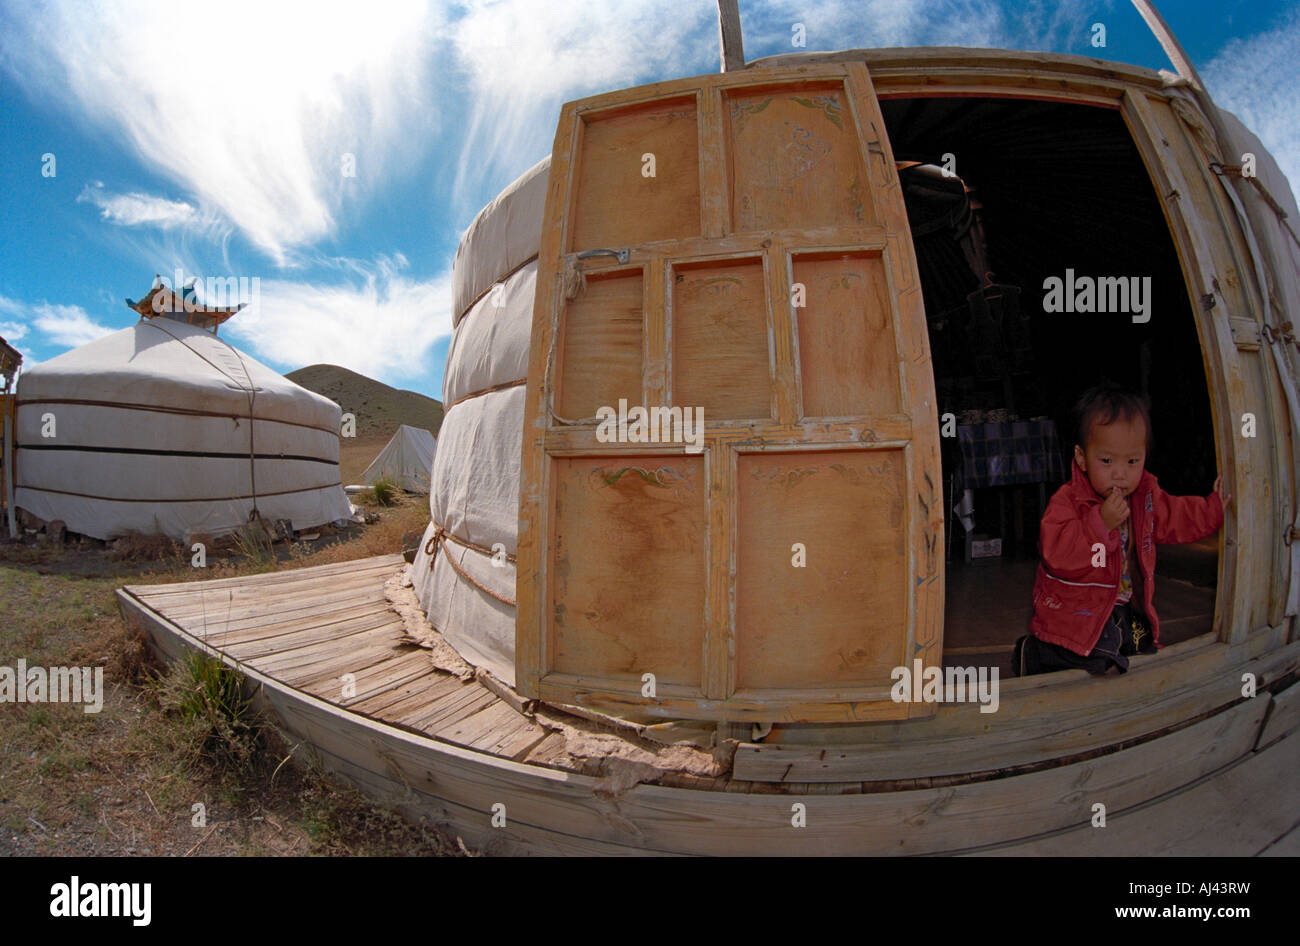 A kid looks out from Mongolian traditional dwelling ger or yurt. Touristic shop. Yolyn am. South Gobi desert. Mongolia Stock Photo